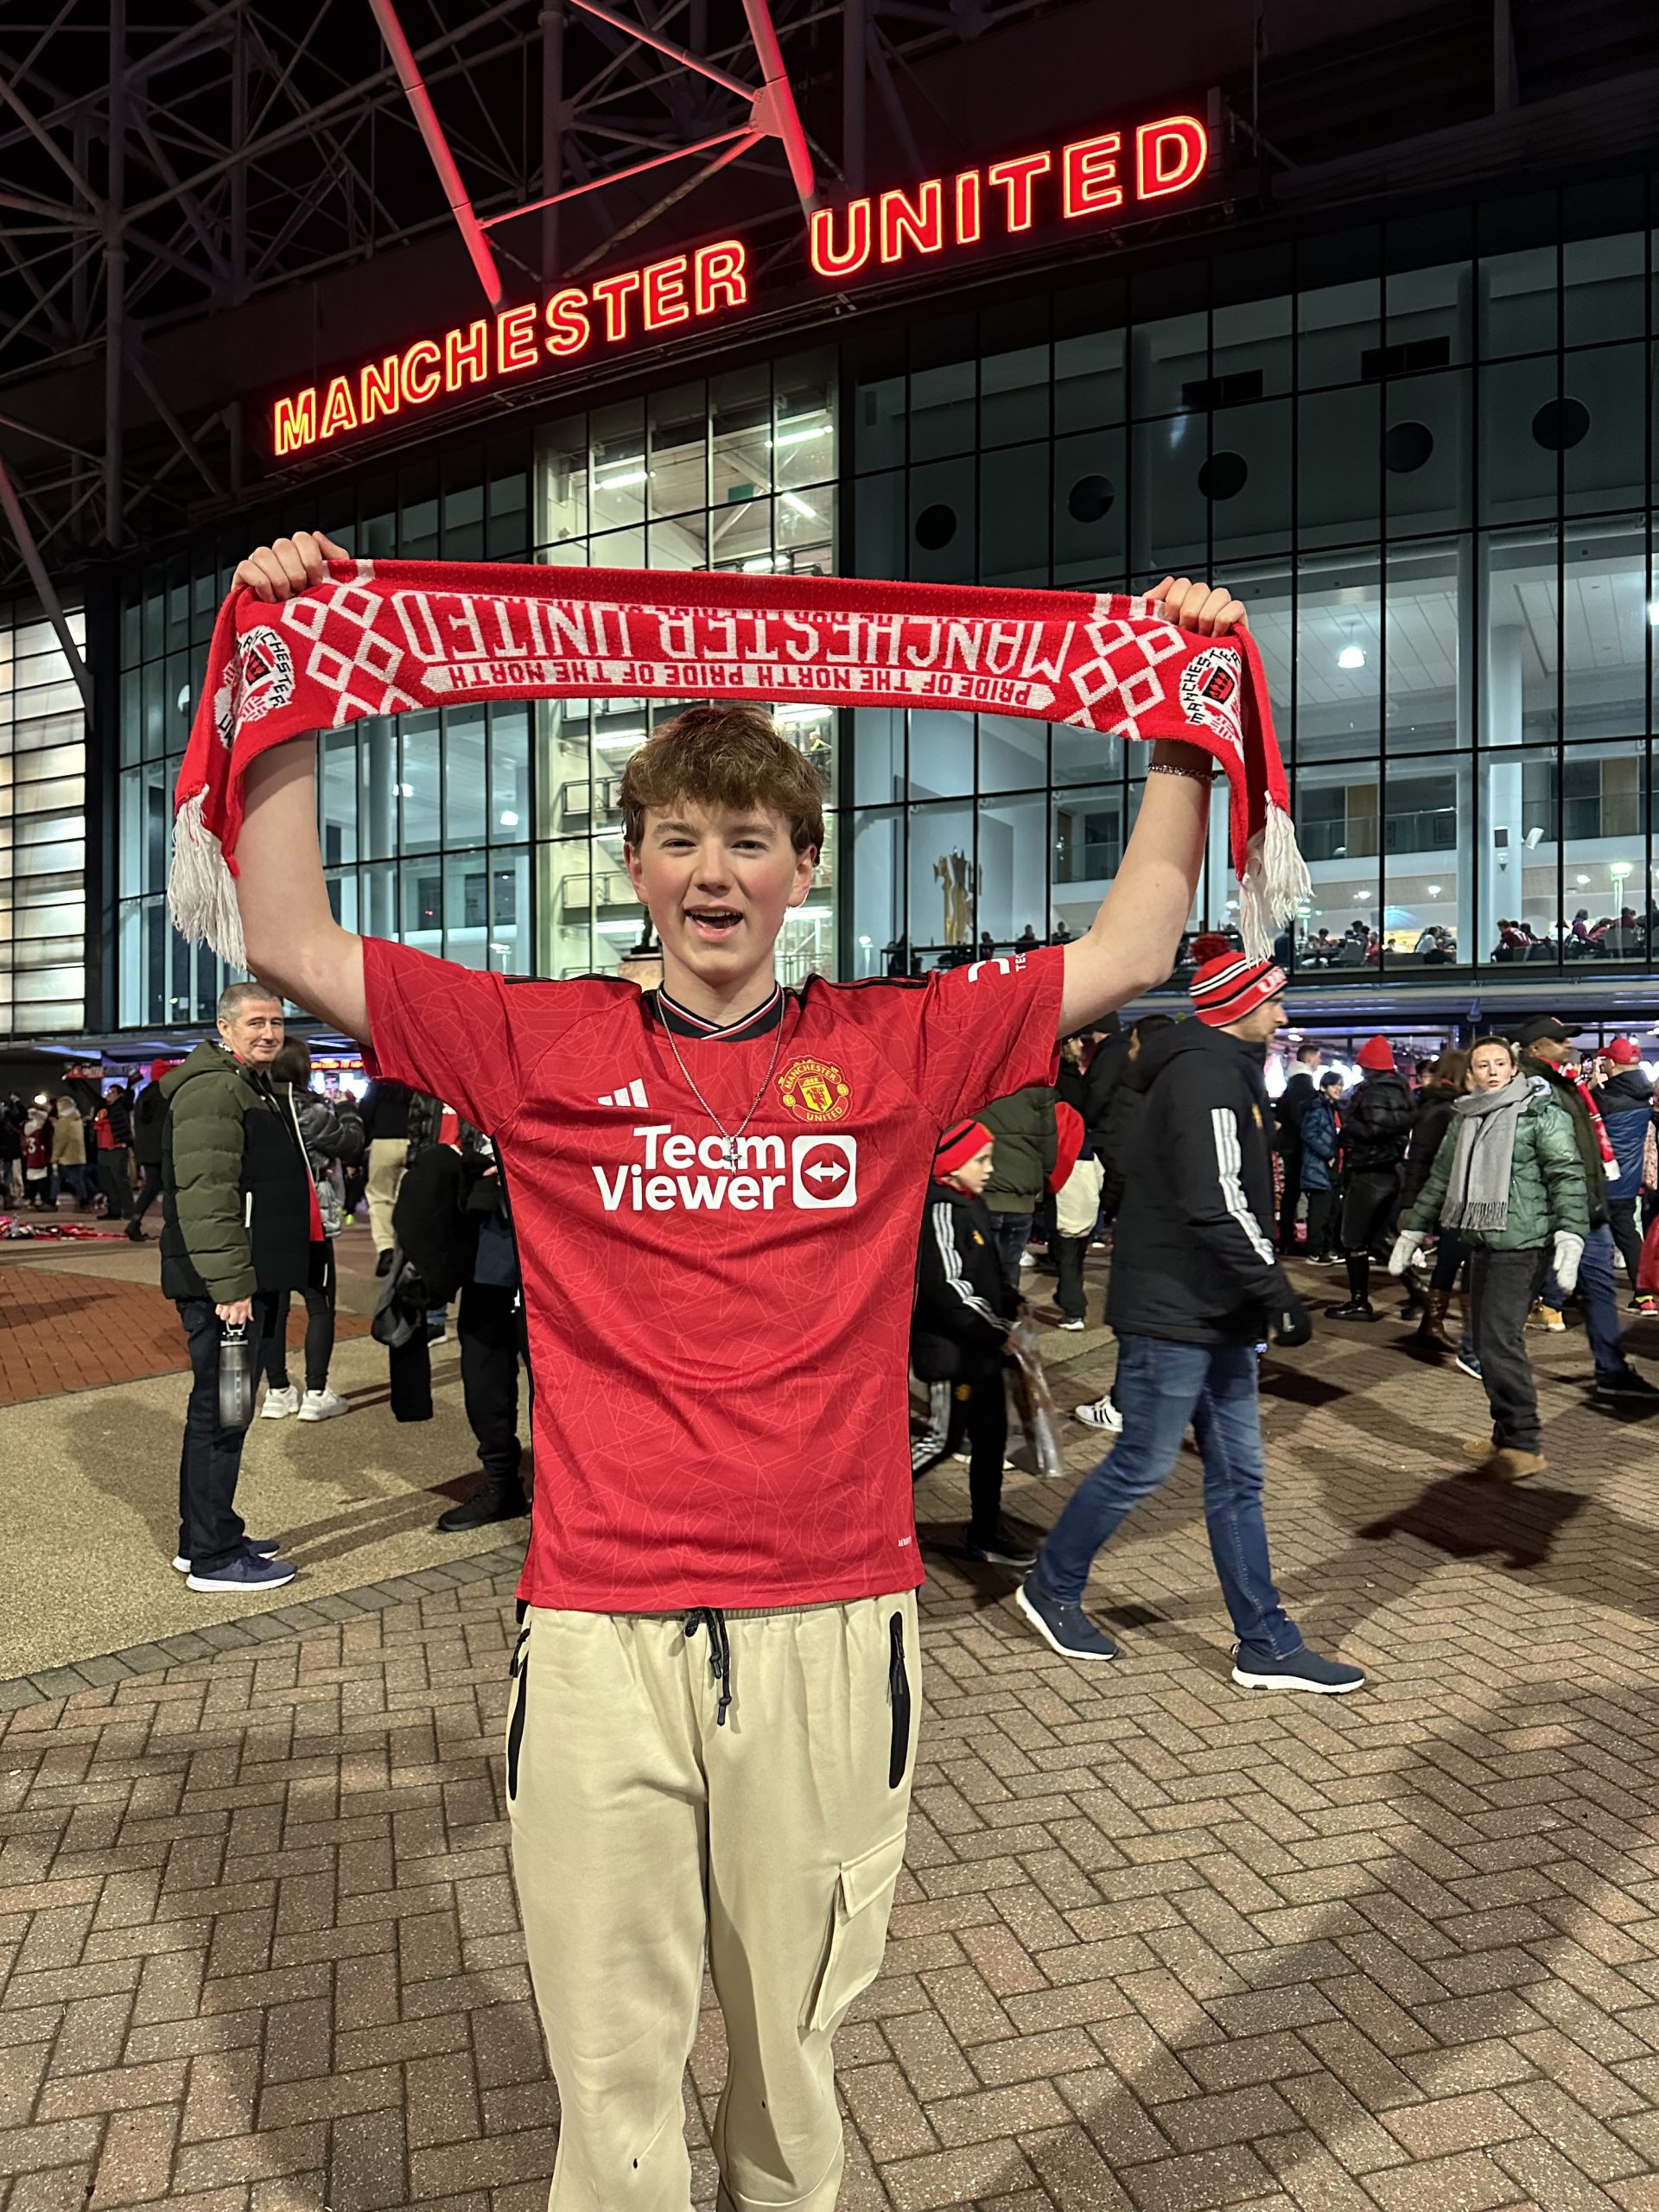 Alex Batty united with family at Man Utd match after vanishing six years ago